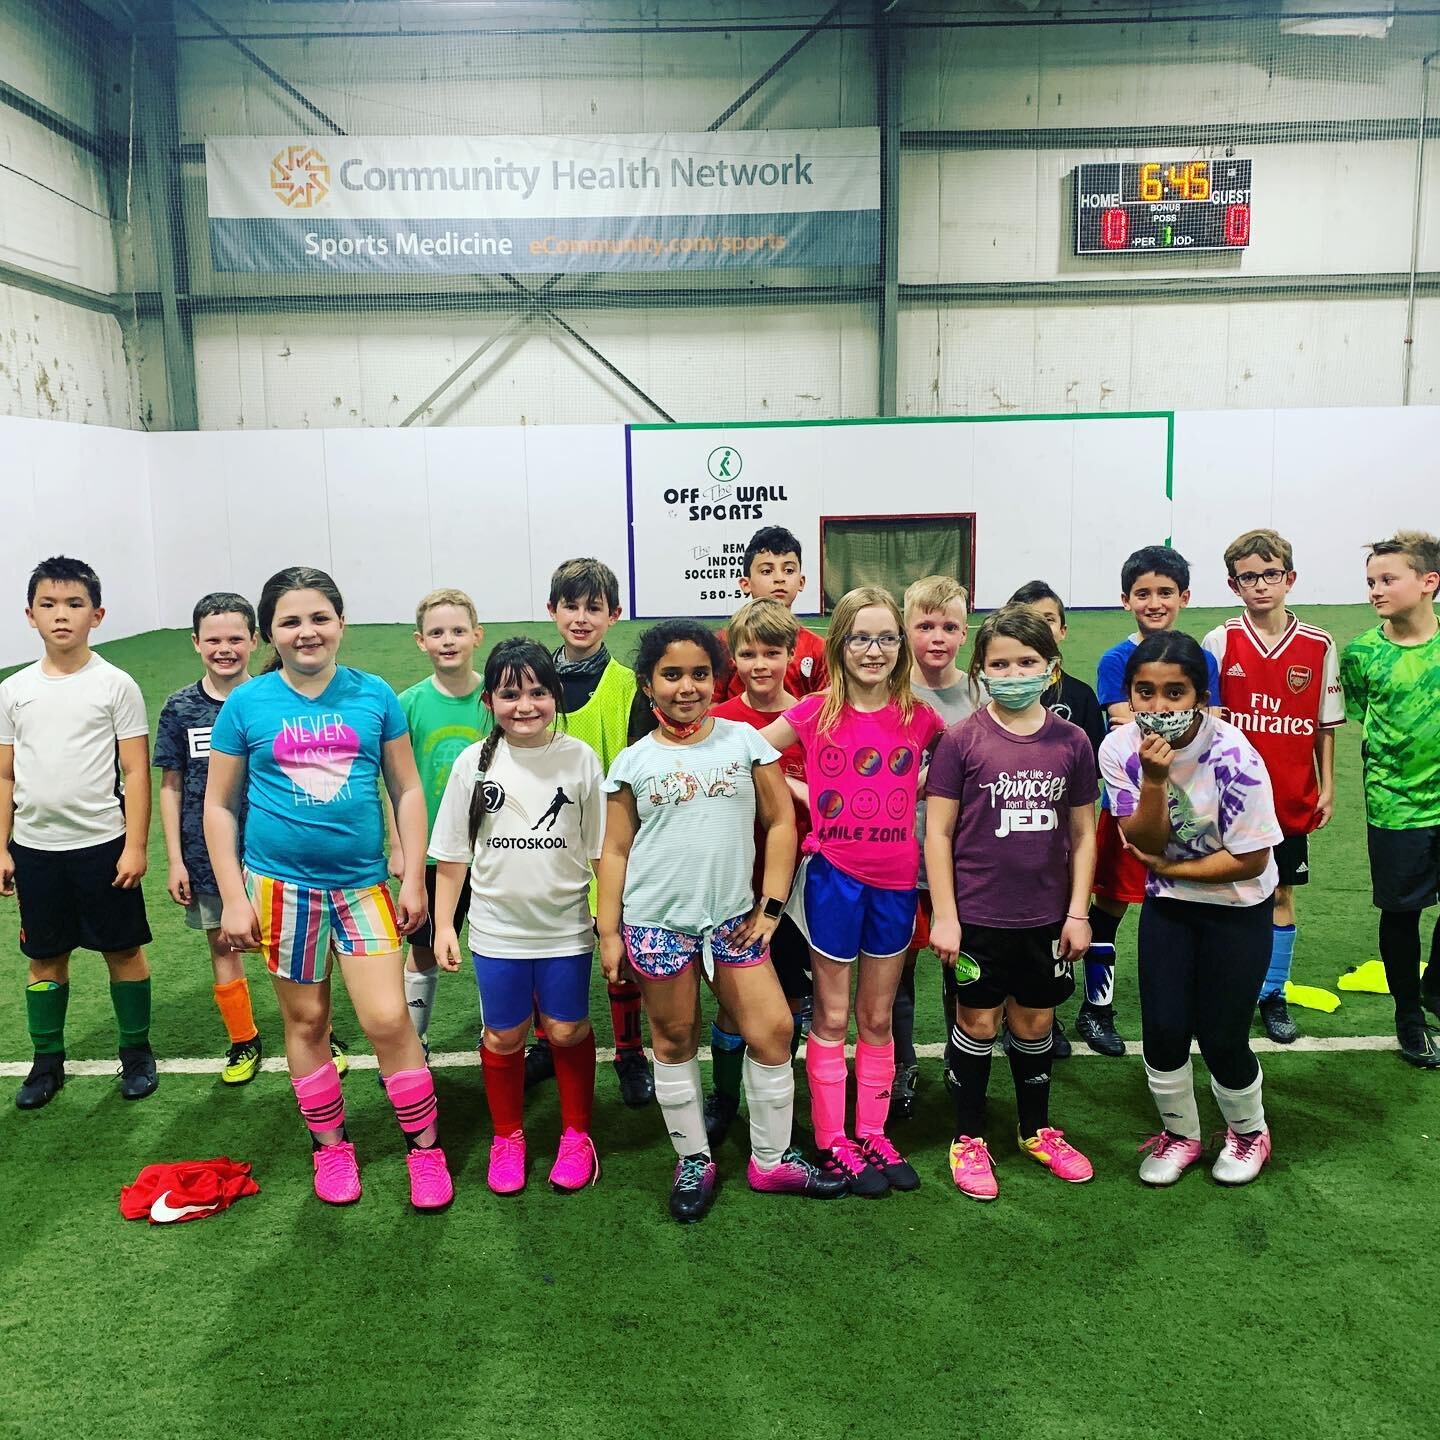 Little ones signing off at Skill Skool for the last class of 20/21. Check out site for future classes #soccer #futbol #football #footballdrills⚽️ #soccerlife #soccertraining #soccerplayer #soccerdrills #soccercoachingdrills